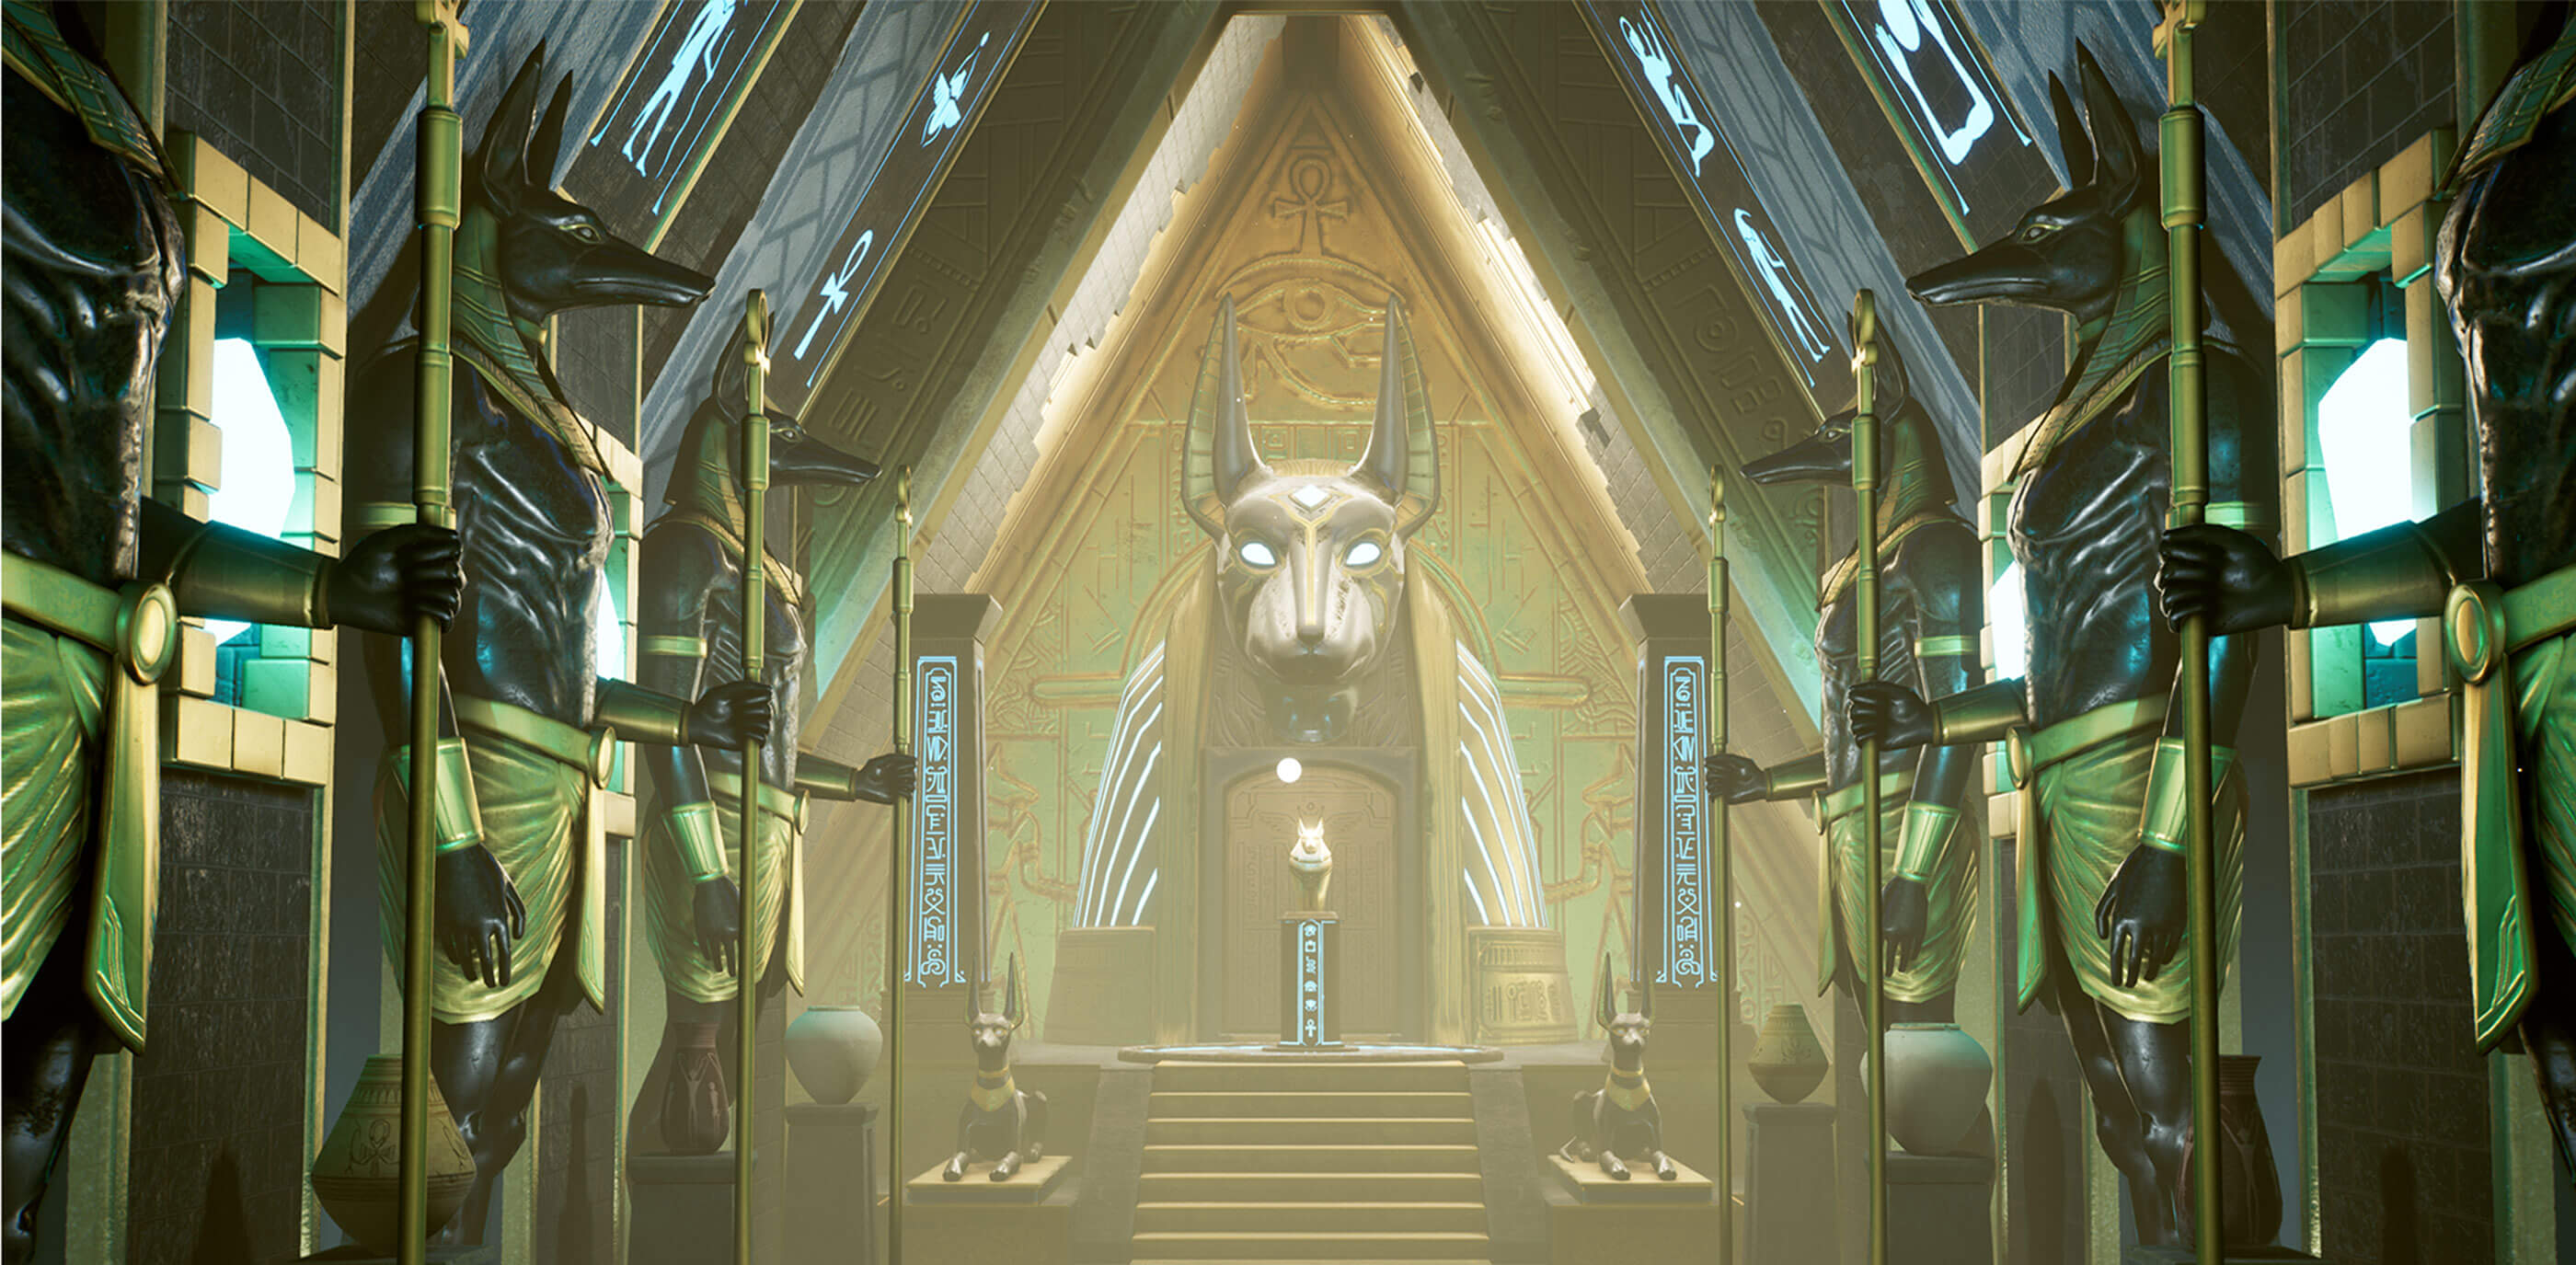 An ornate chamber adorned with Anubis statues and jackal imagery.